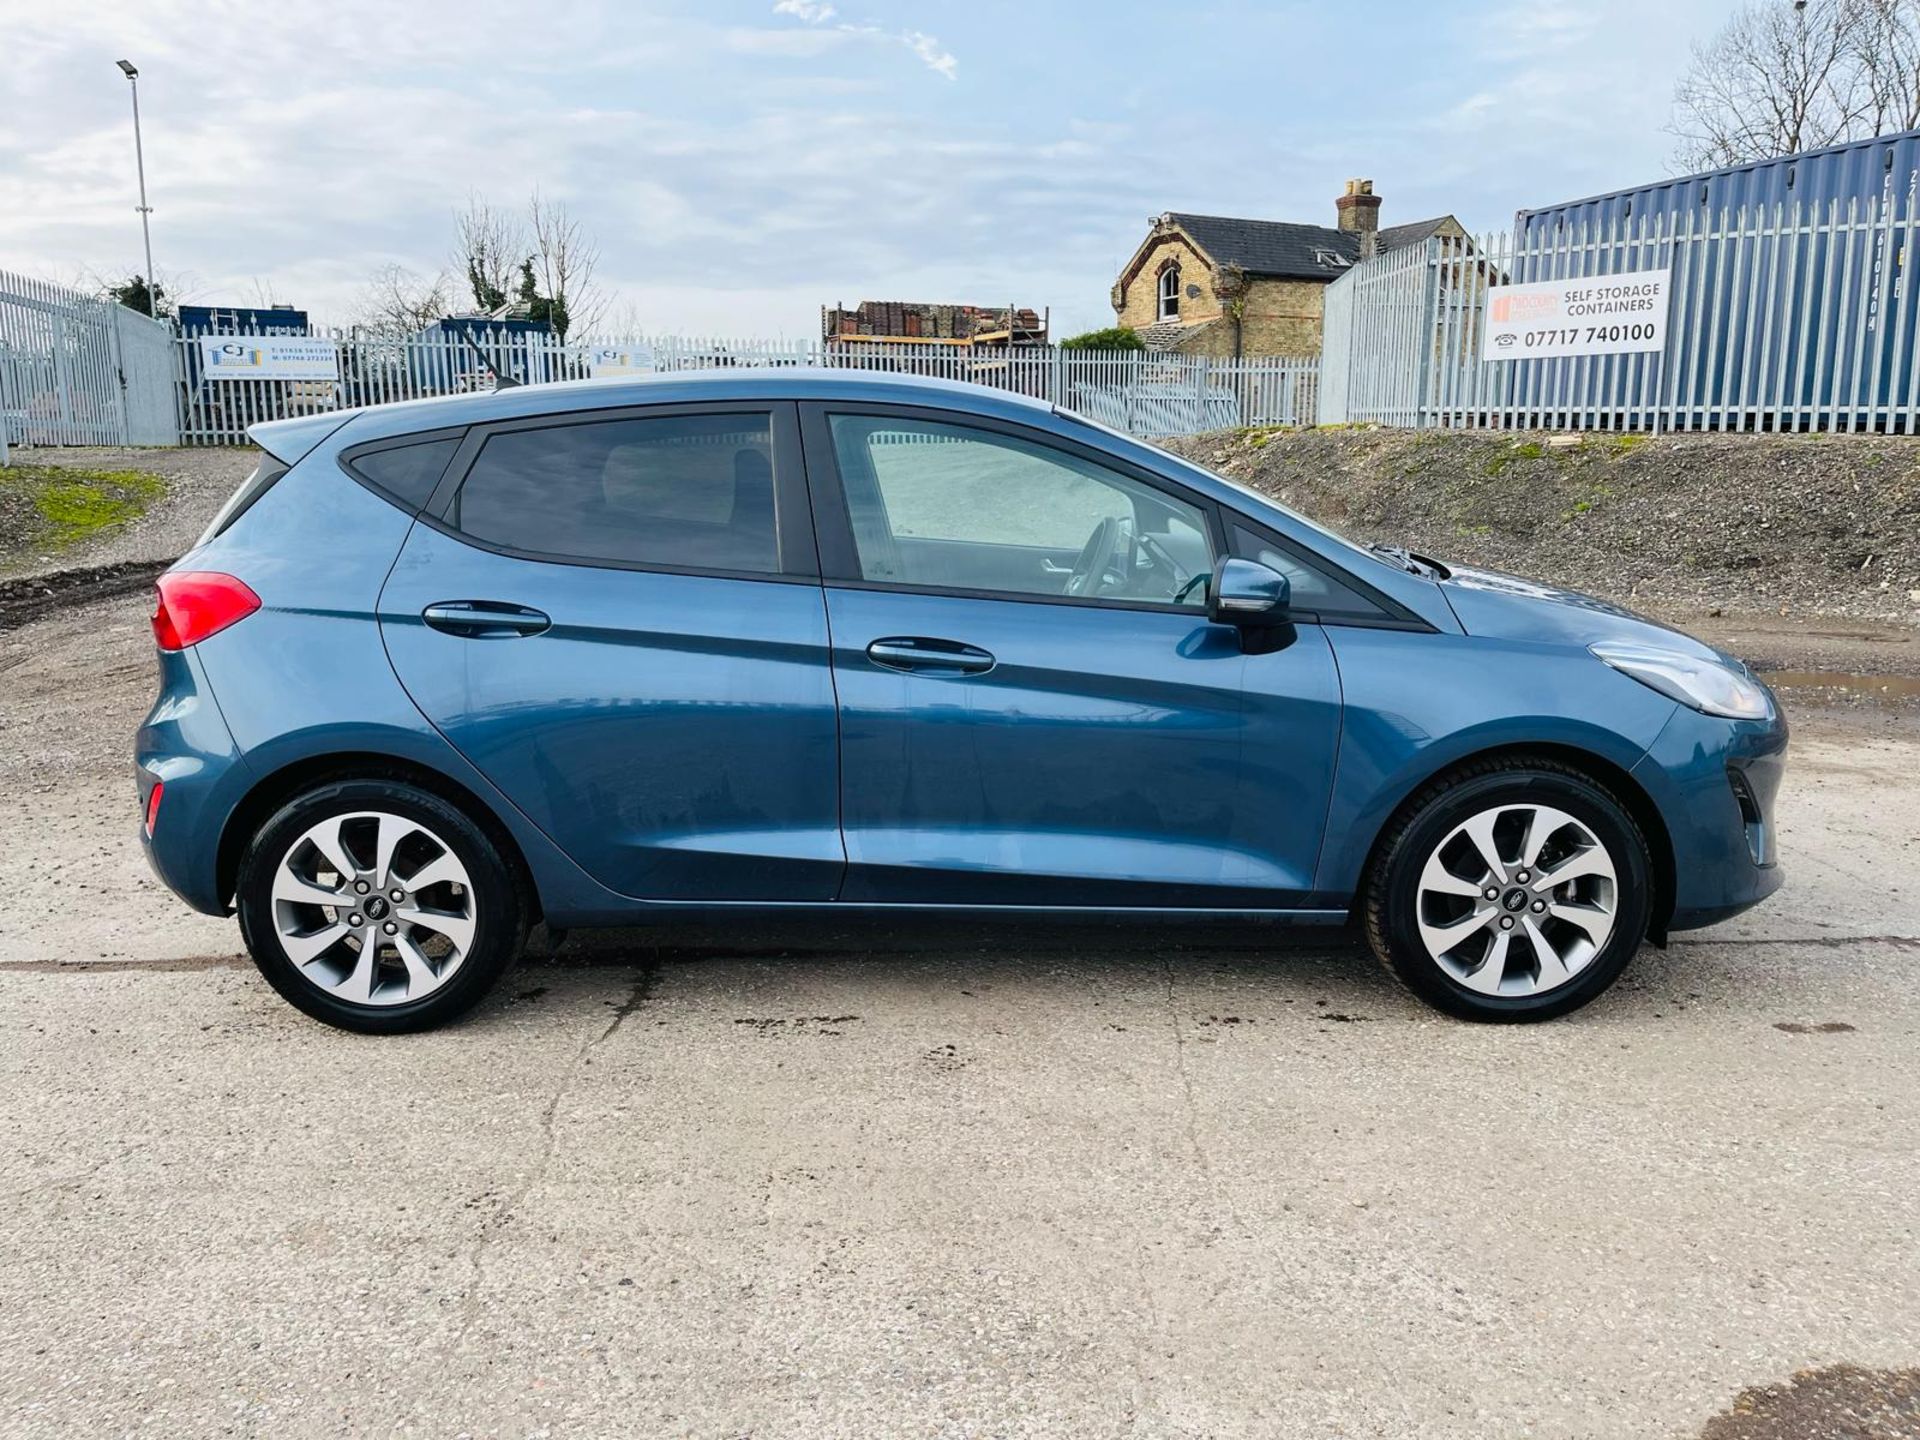 ** ON SALE ** Ford Fiesta Trend Ti-VCT 85 - 2019 '69 Reg' -No Vat-ULEZ Compliant - Only 48,539 miles - Image 10 of 32